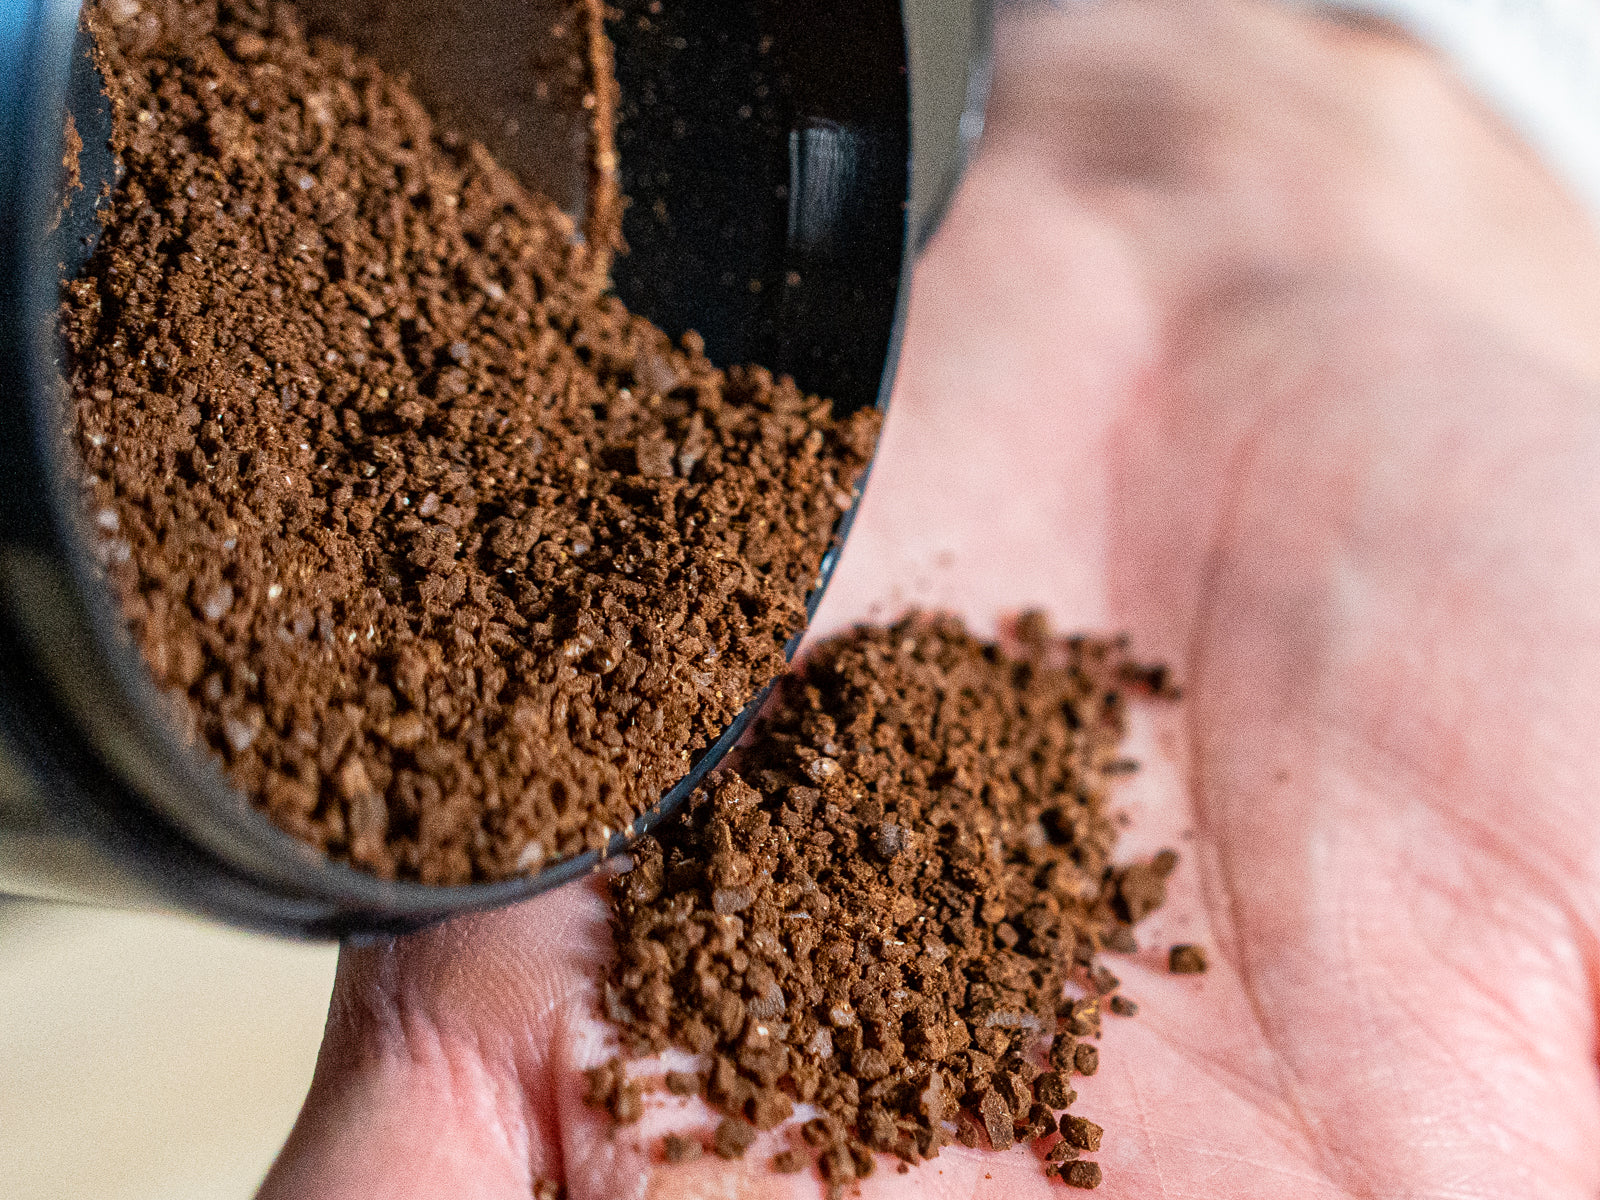 How to Choose a Coffee Grinder – How to Select the Best Home